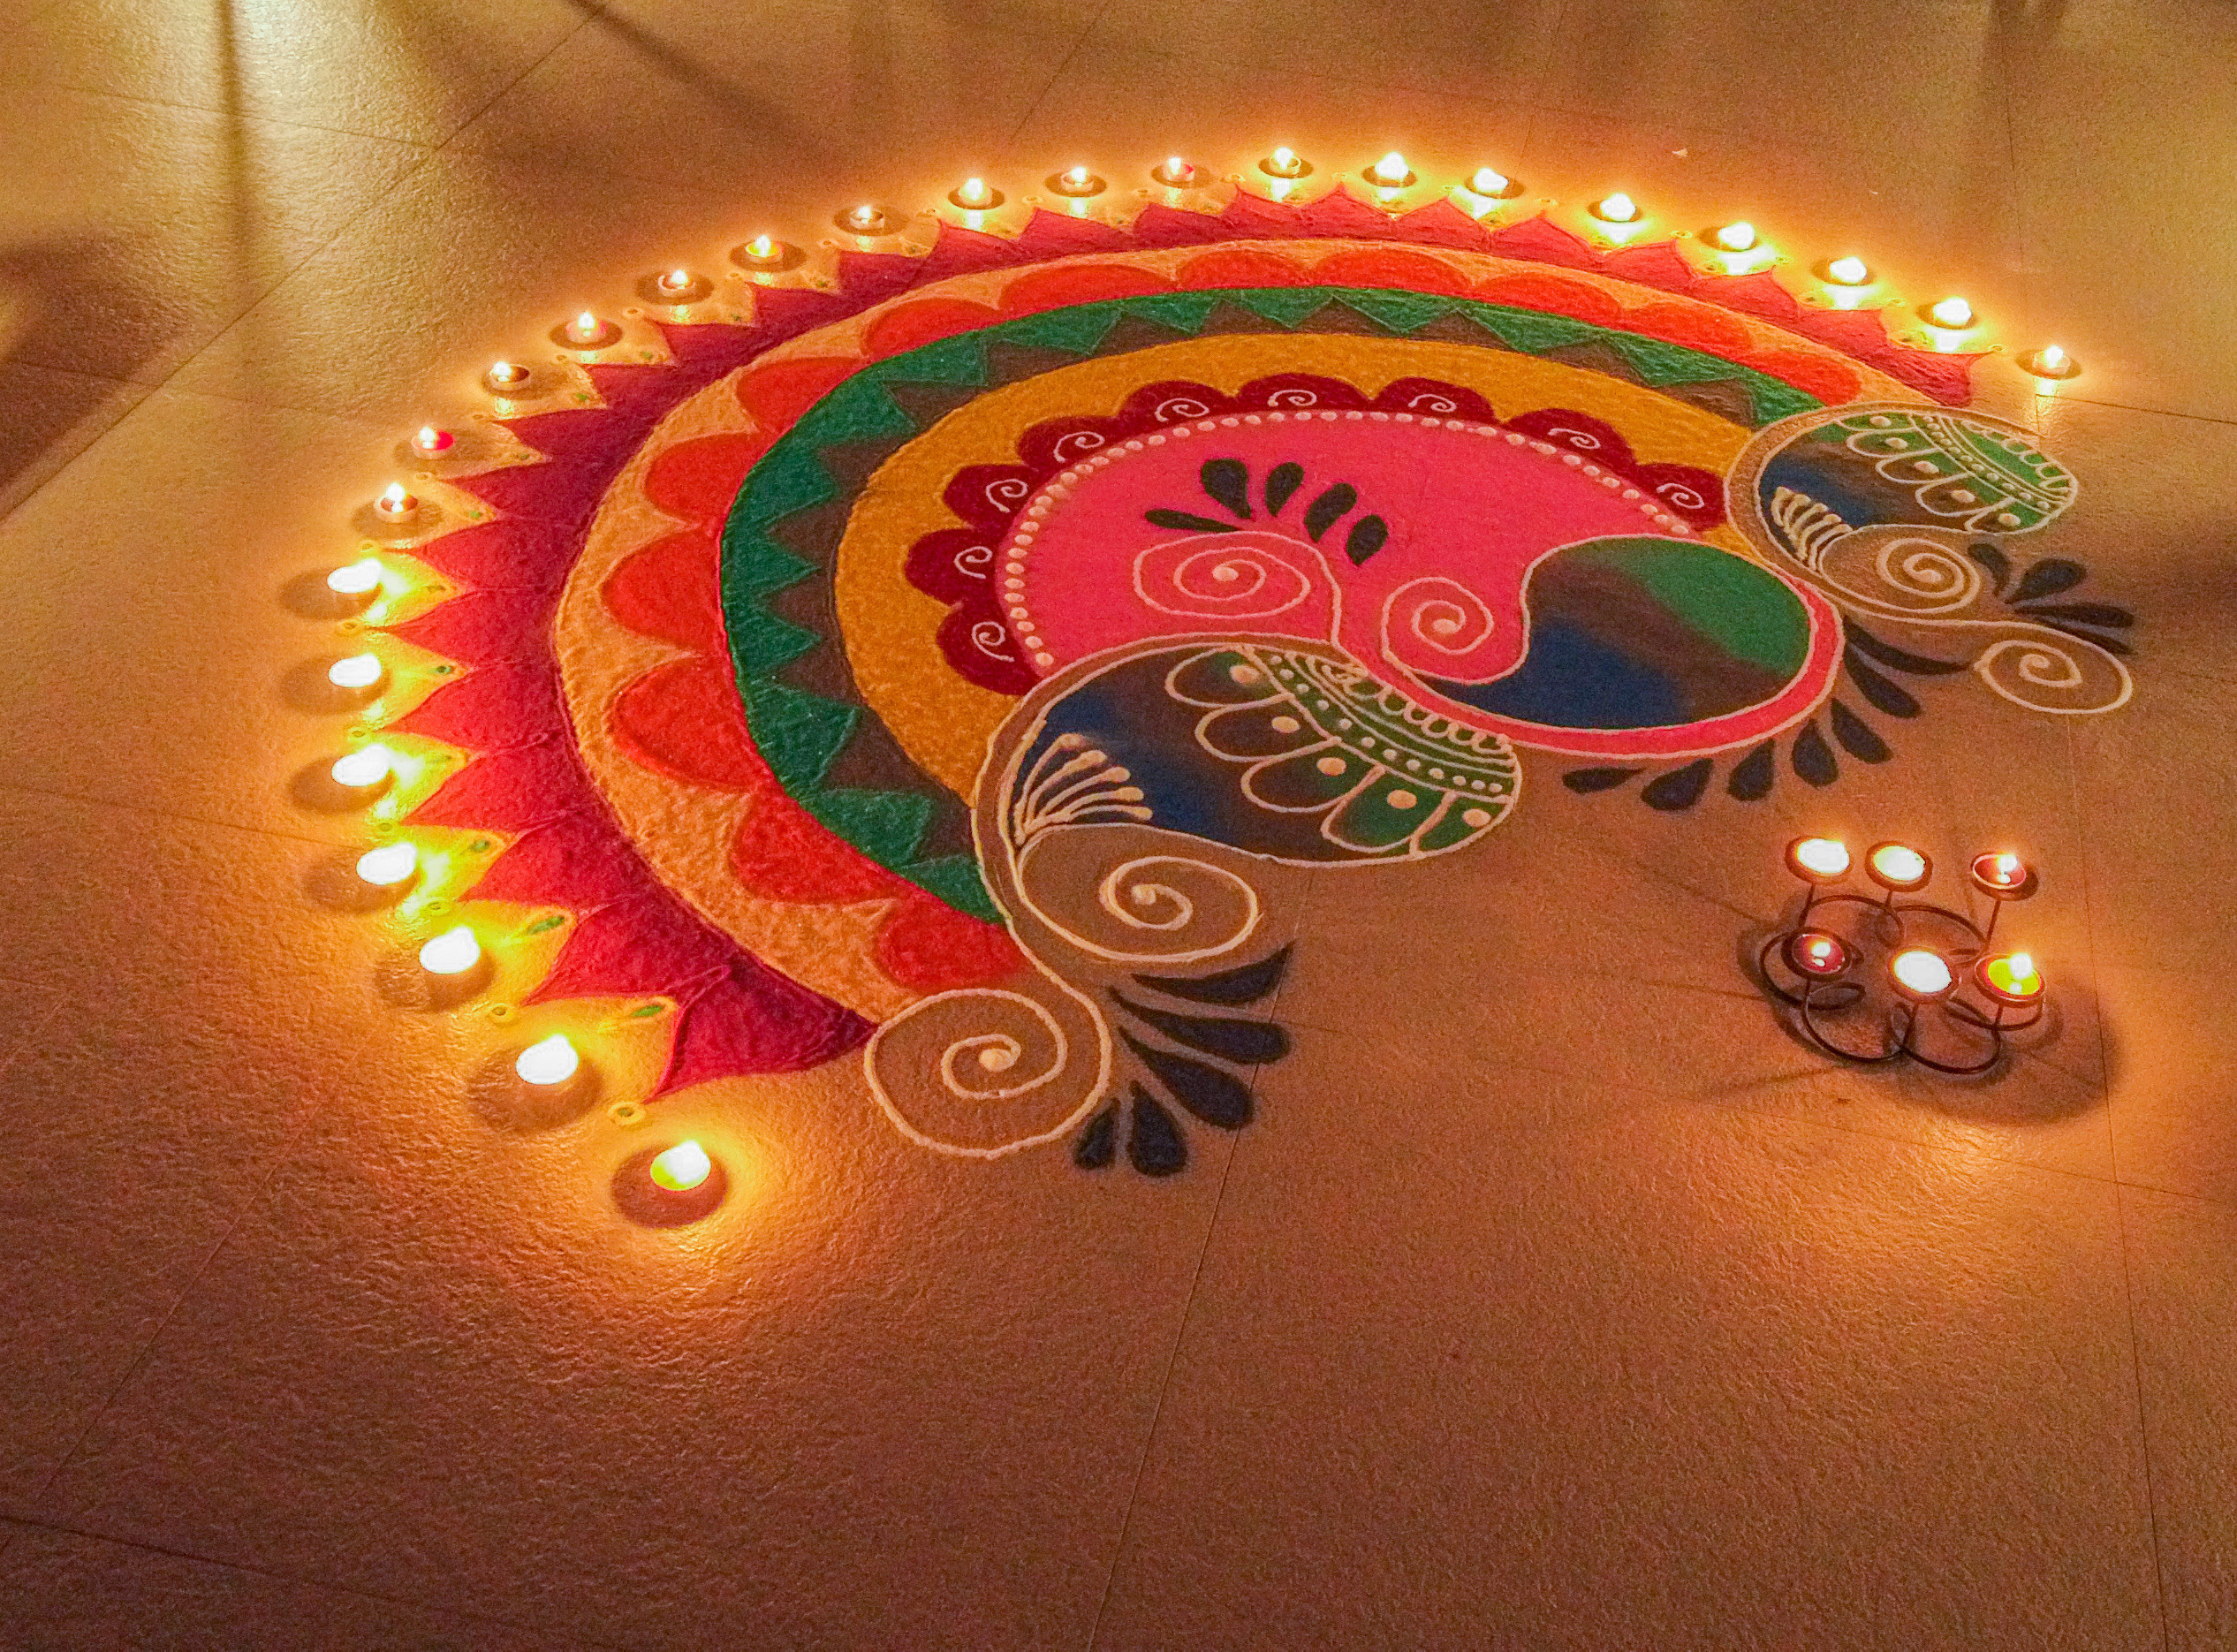 Traditional rangoli made using sand colours during Diwali days. Rangoli decorated with lamps